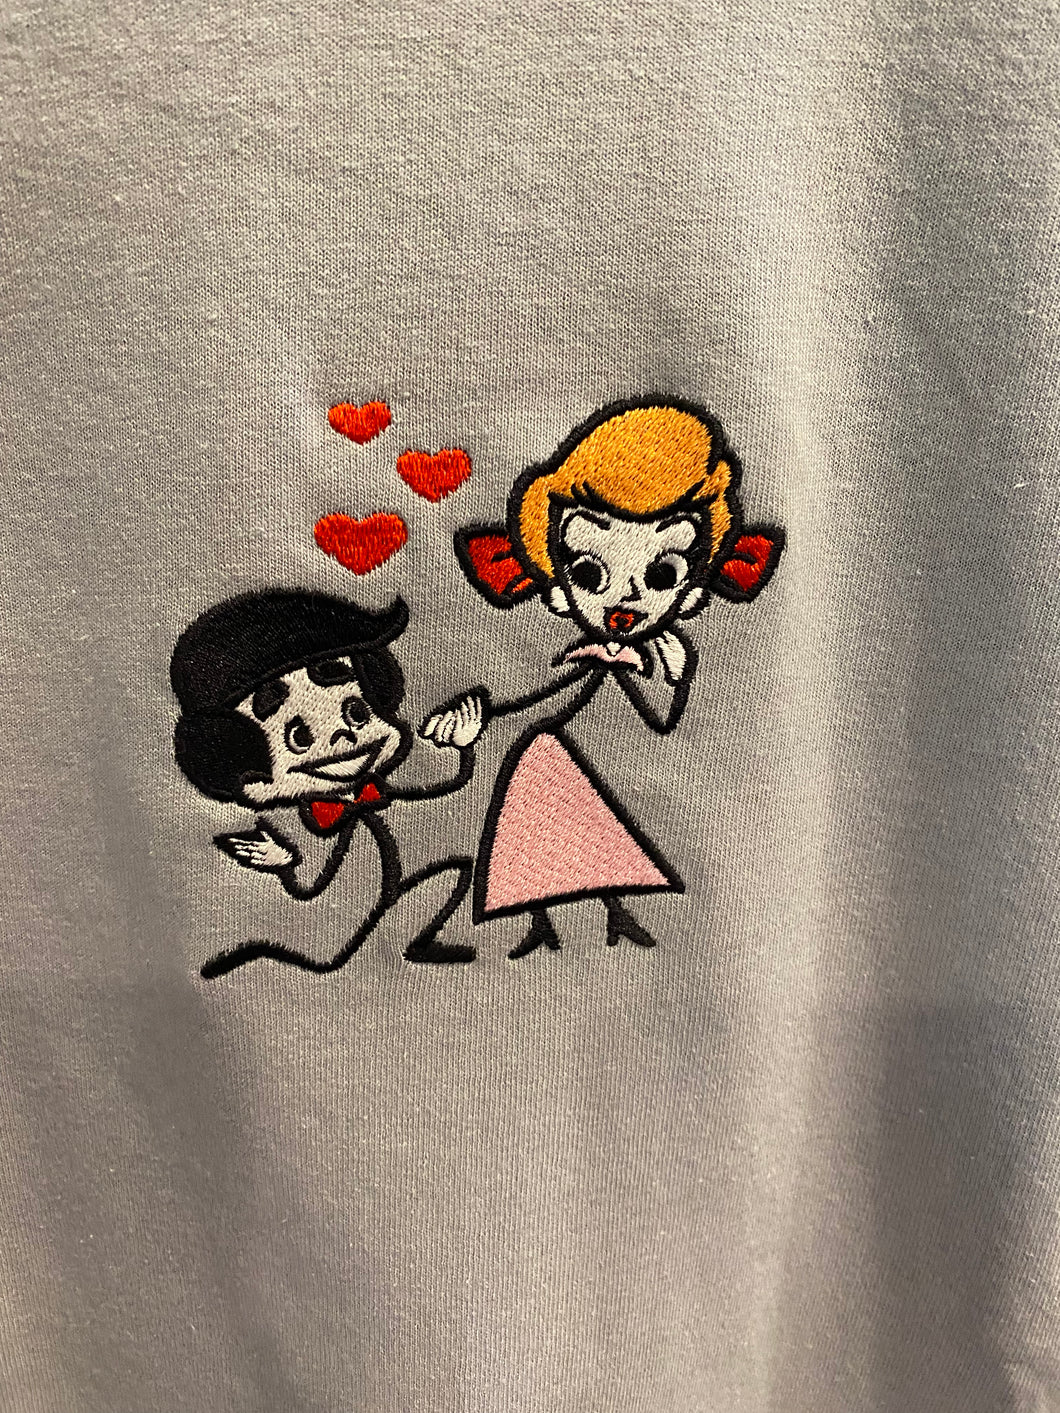 Lucy and Ricky Embroidered T-Shirt